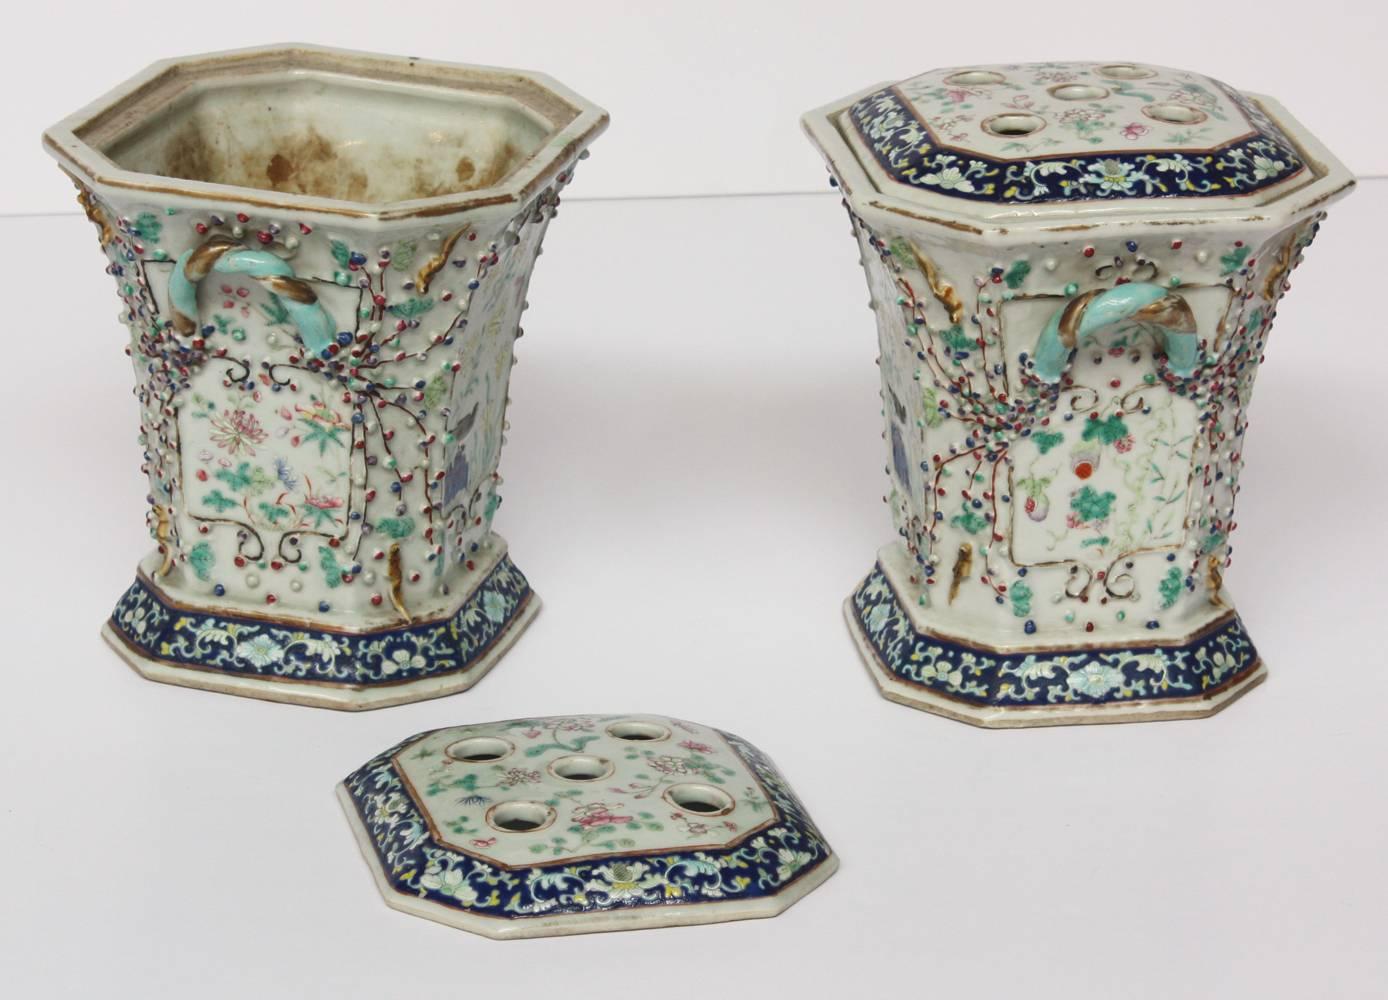 Pair of Chinese export bough pots with original lids, famille rose panels decorated with birds and squirrels.